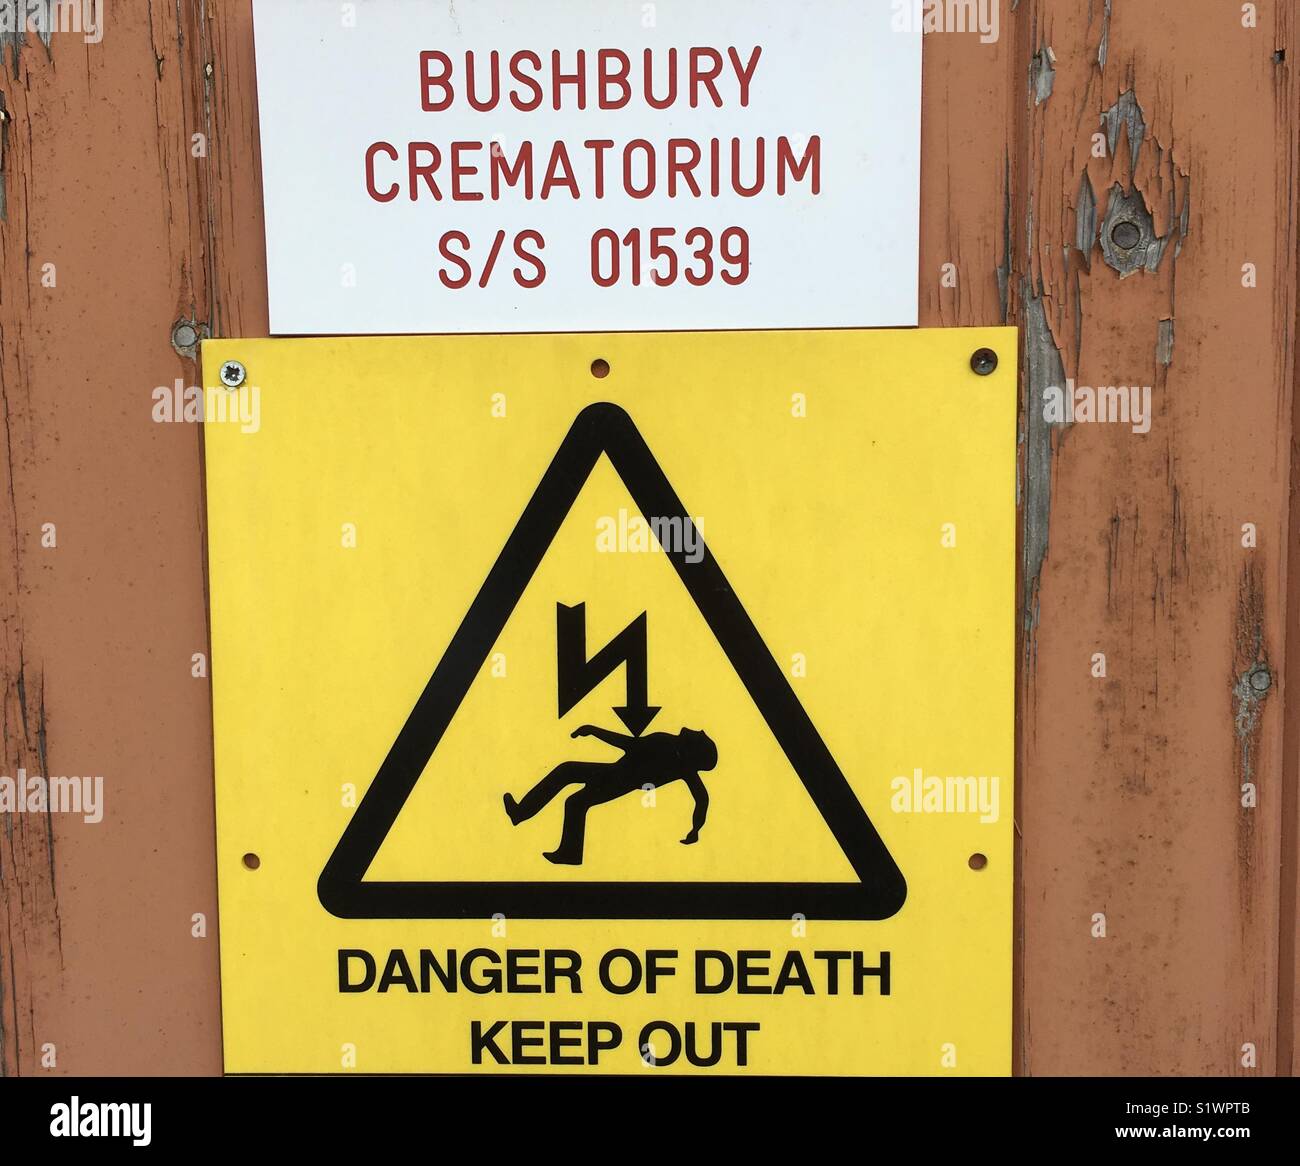 A warning sign with unintentional black humour at a crematorium facility in the uk Stock Photo